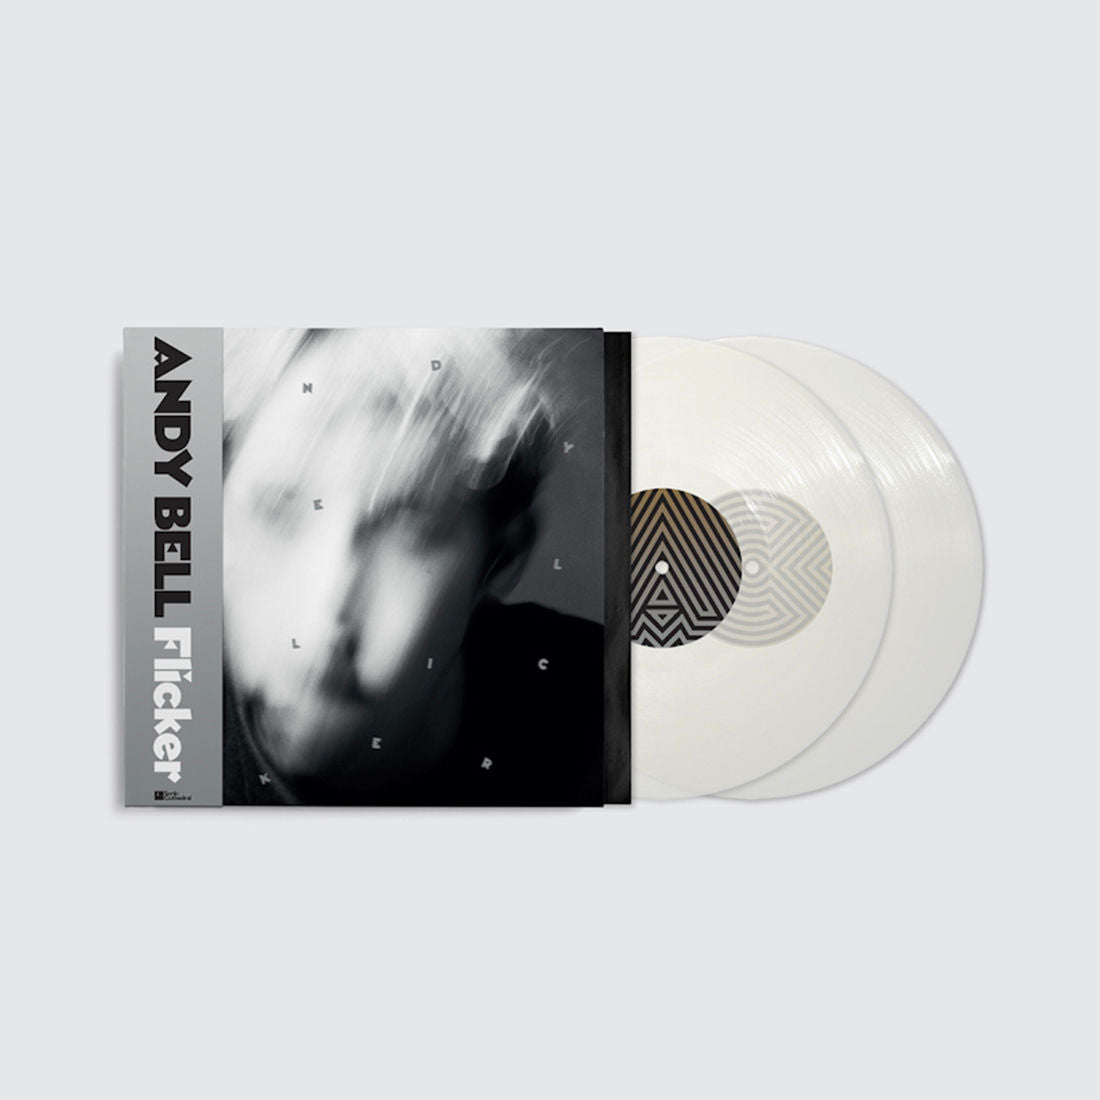 Andy Bell - Flicker: Limited Clear Vinyl 2LP